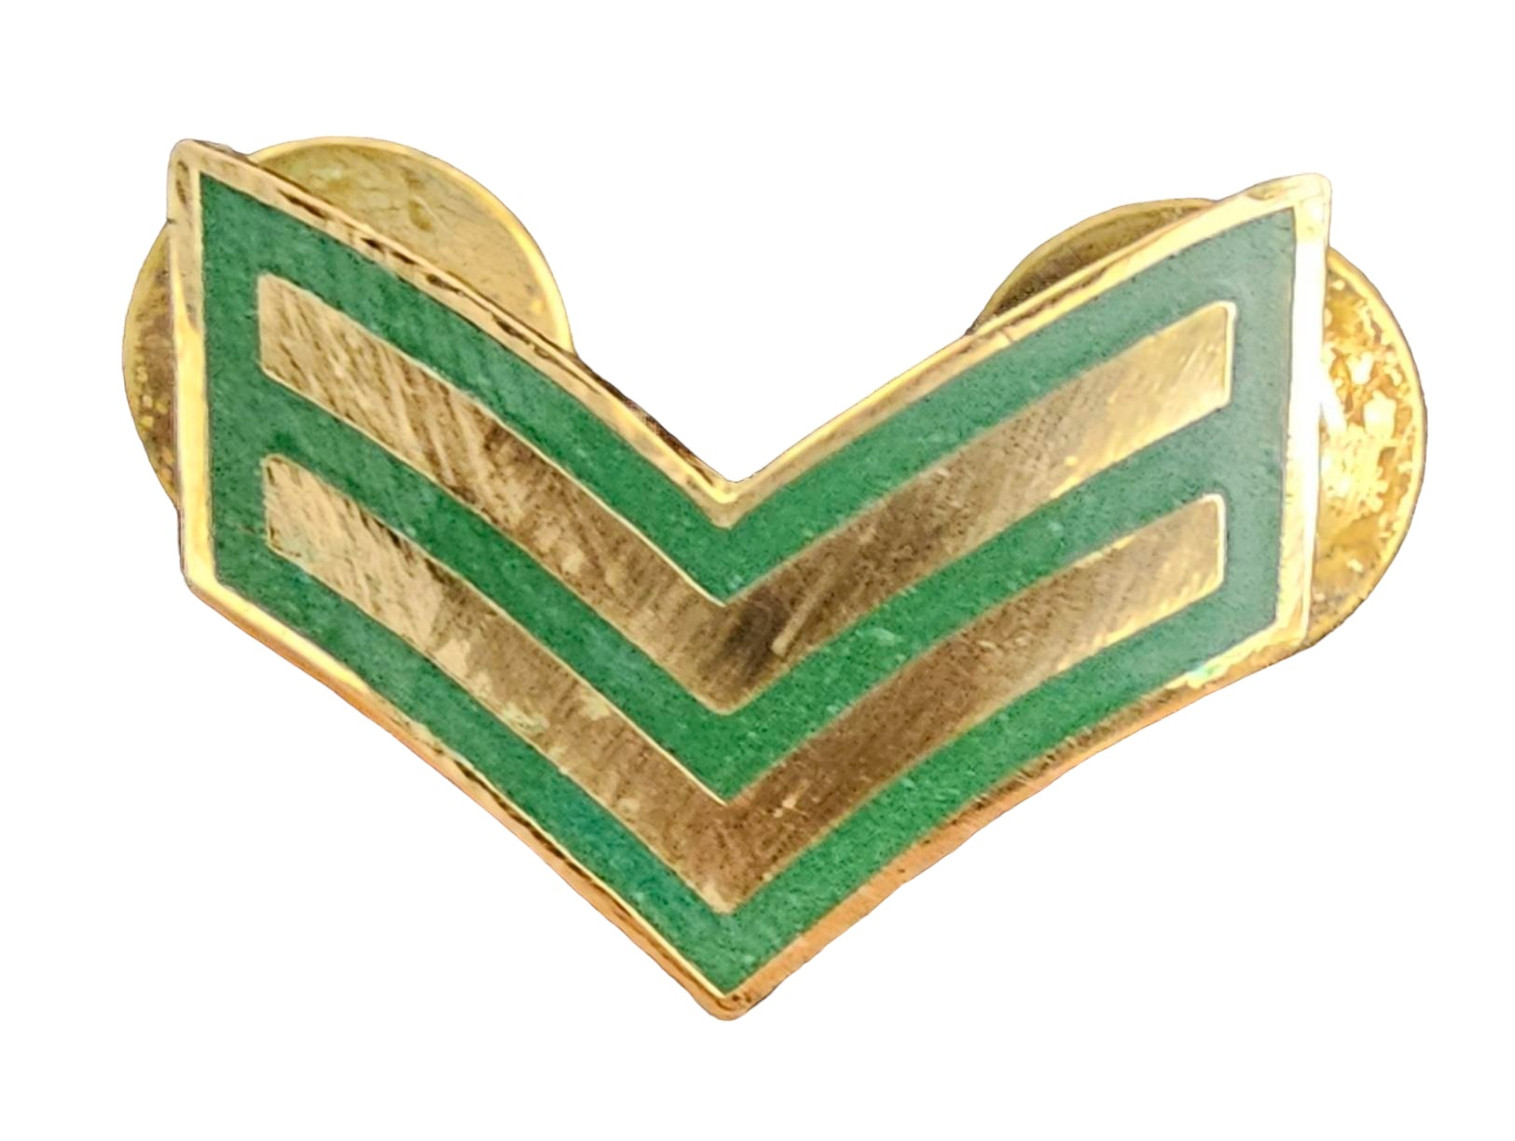 Canadian Armed Forces Corporal Dress Rank Pin - Set of 4